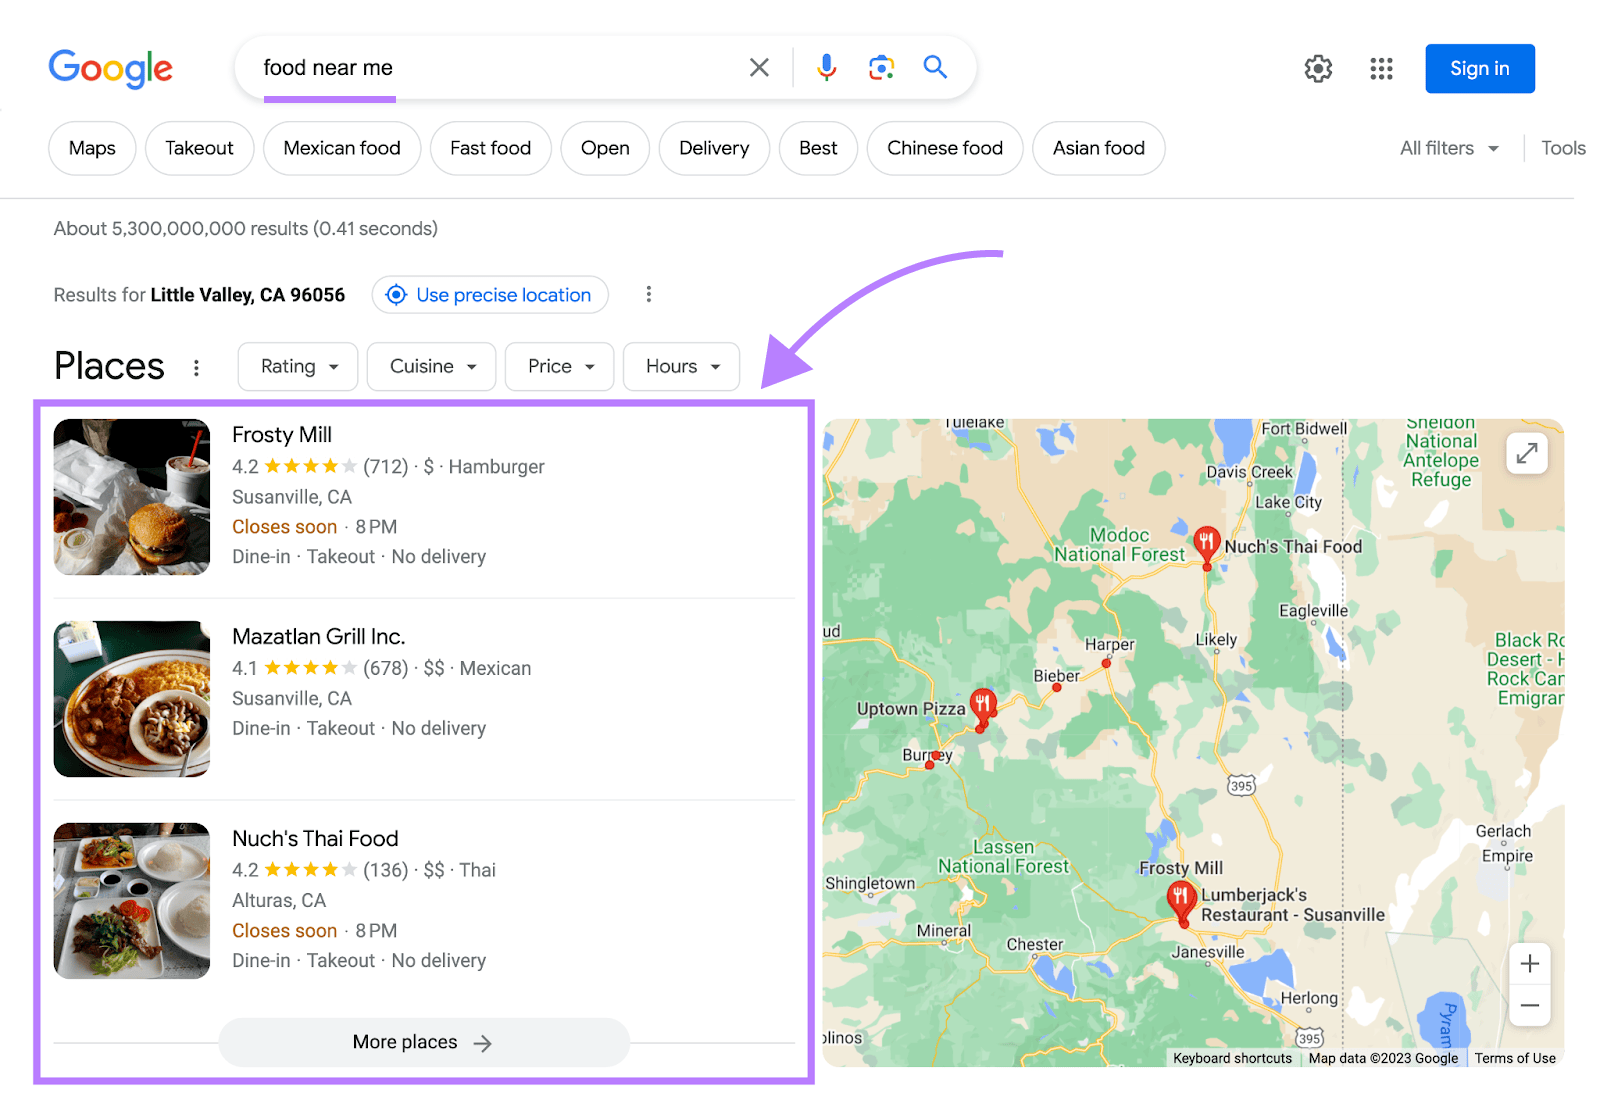 A local search result on Google for "food near me" query